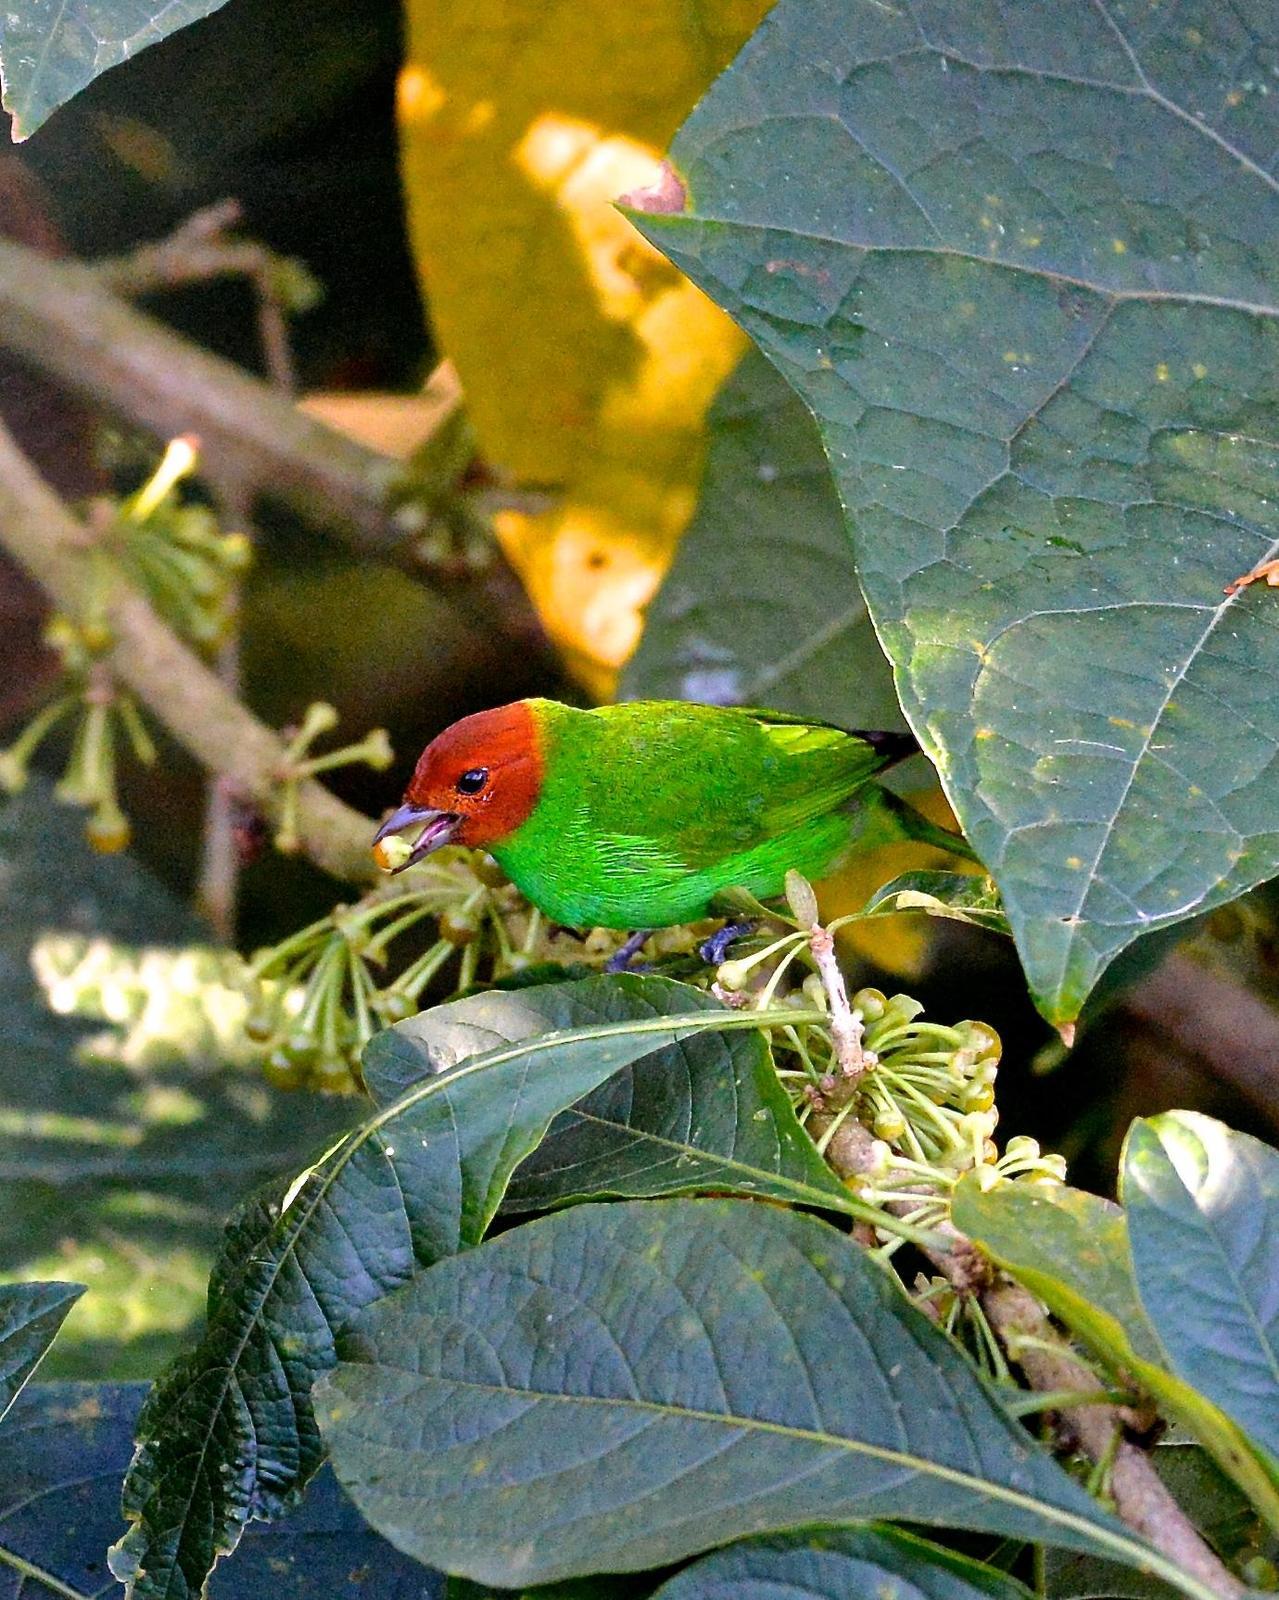 Bay-headed Tanager (Bay-and-green) Photo by Gerald Friesen